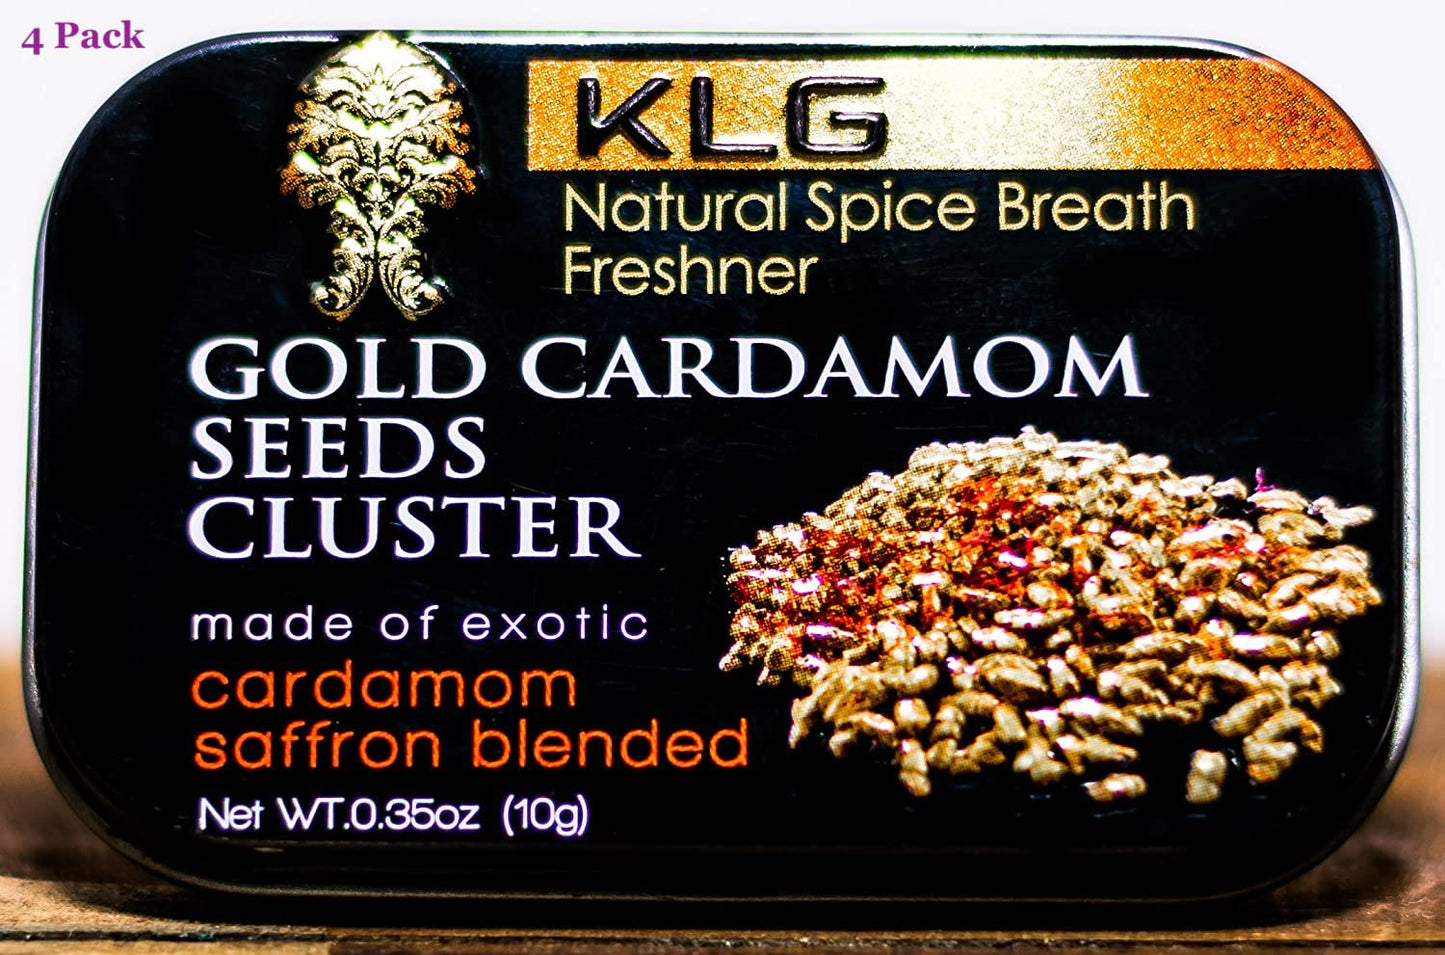 4 Pack of Gold Cardamom Seeds Clusters